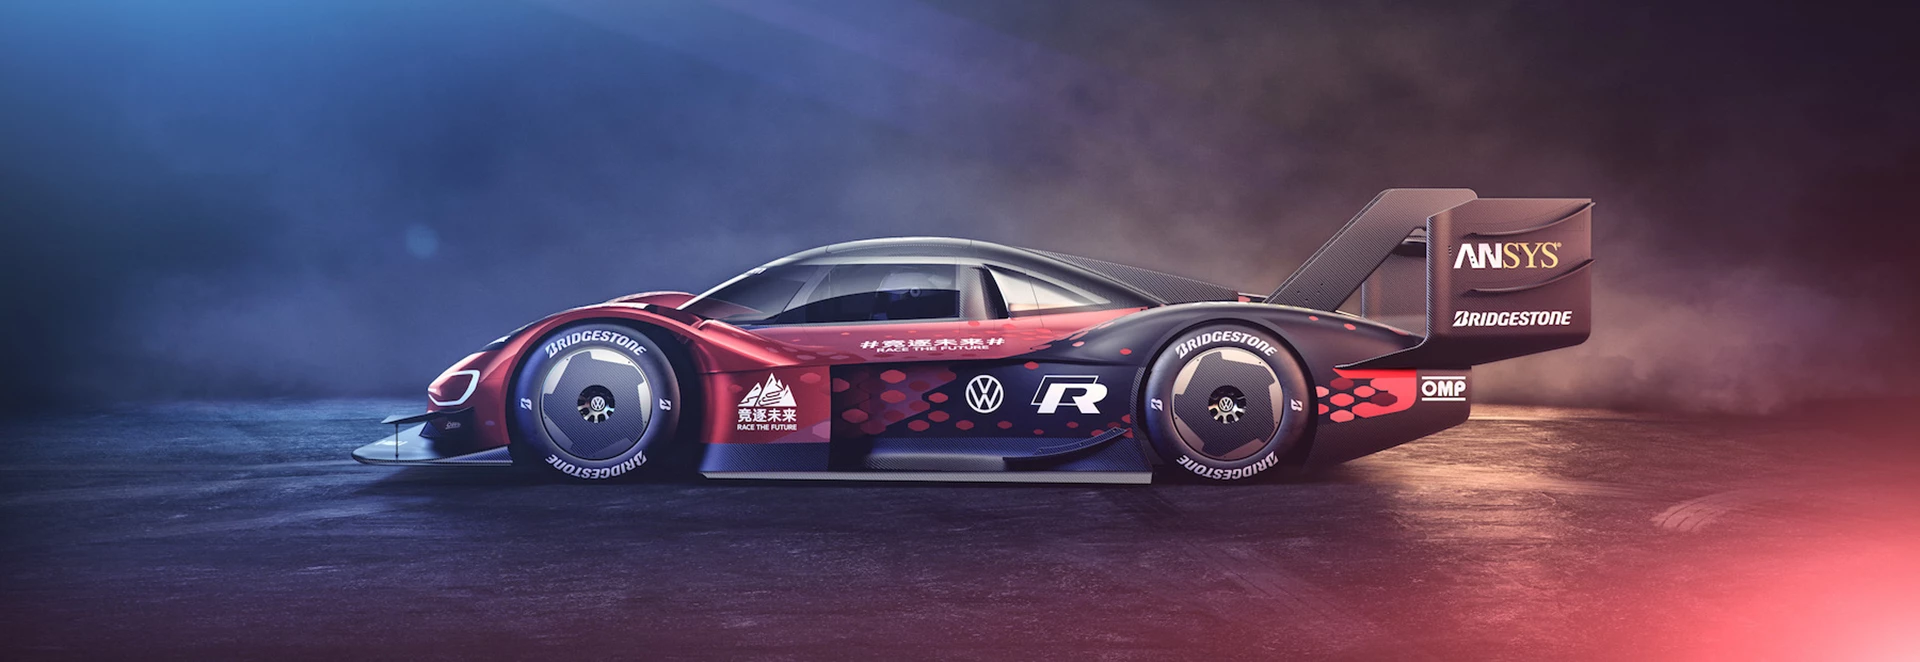 Volkswagen ID.R shown in new livery ahead of fresh record attempt